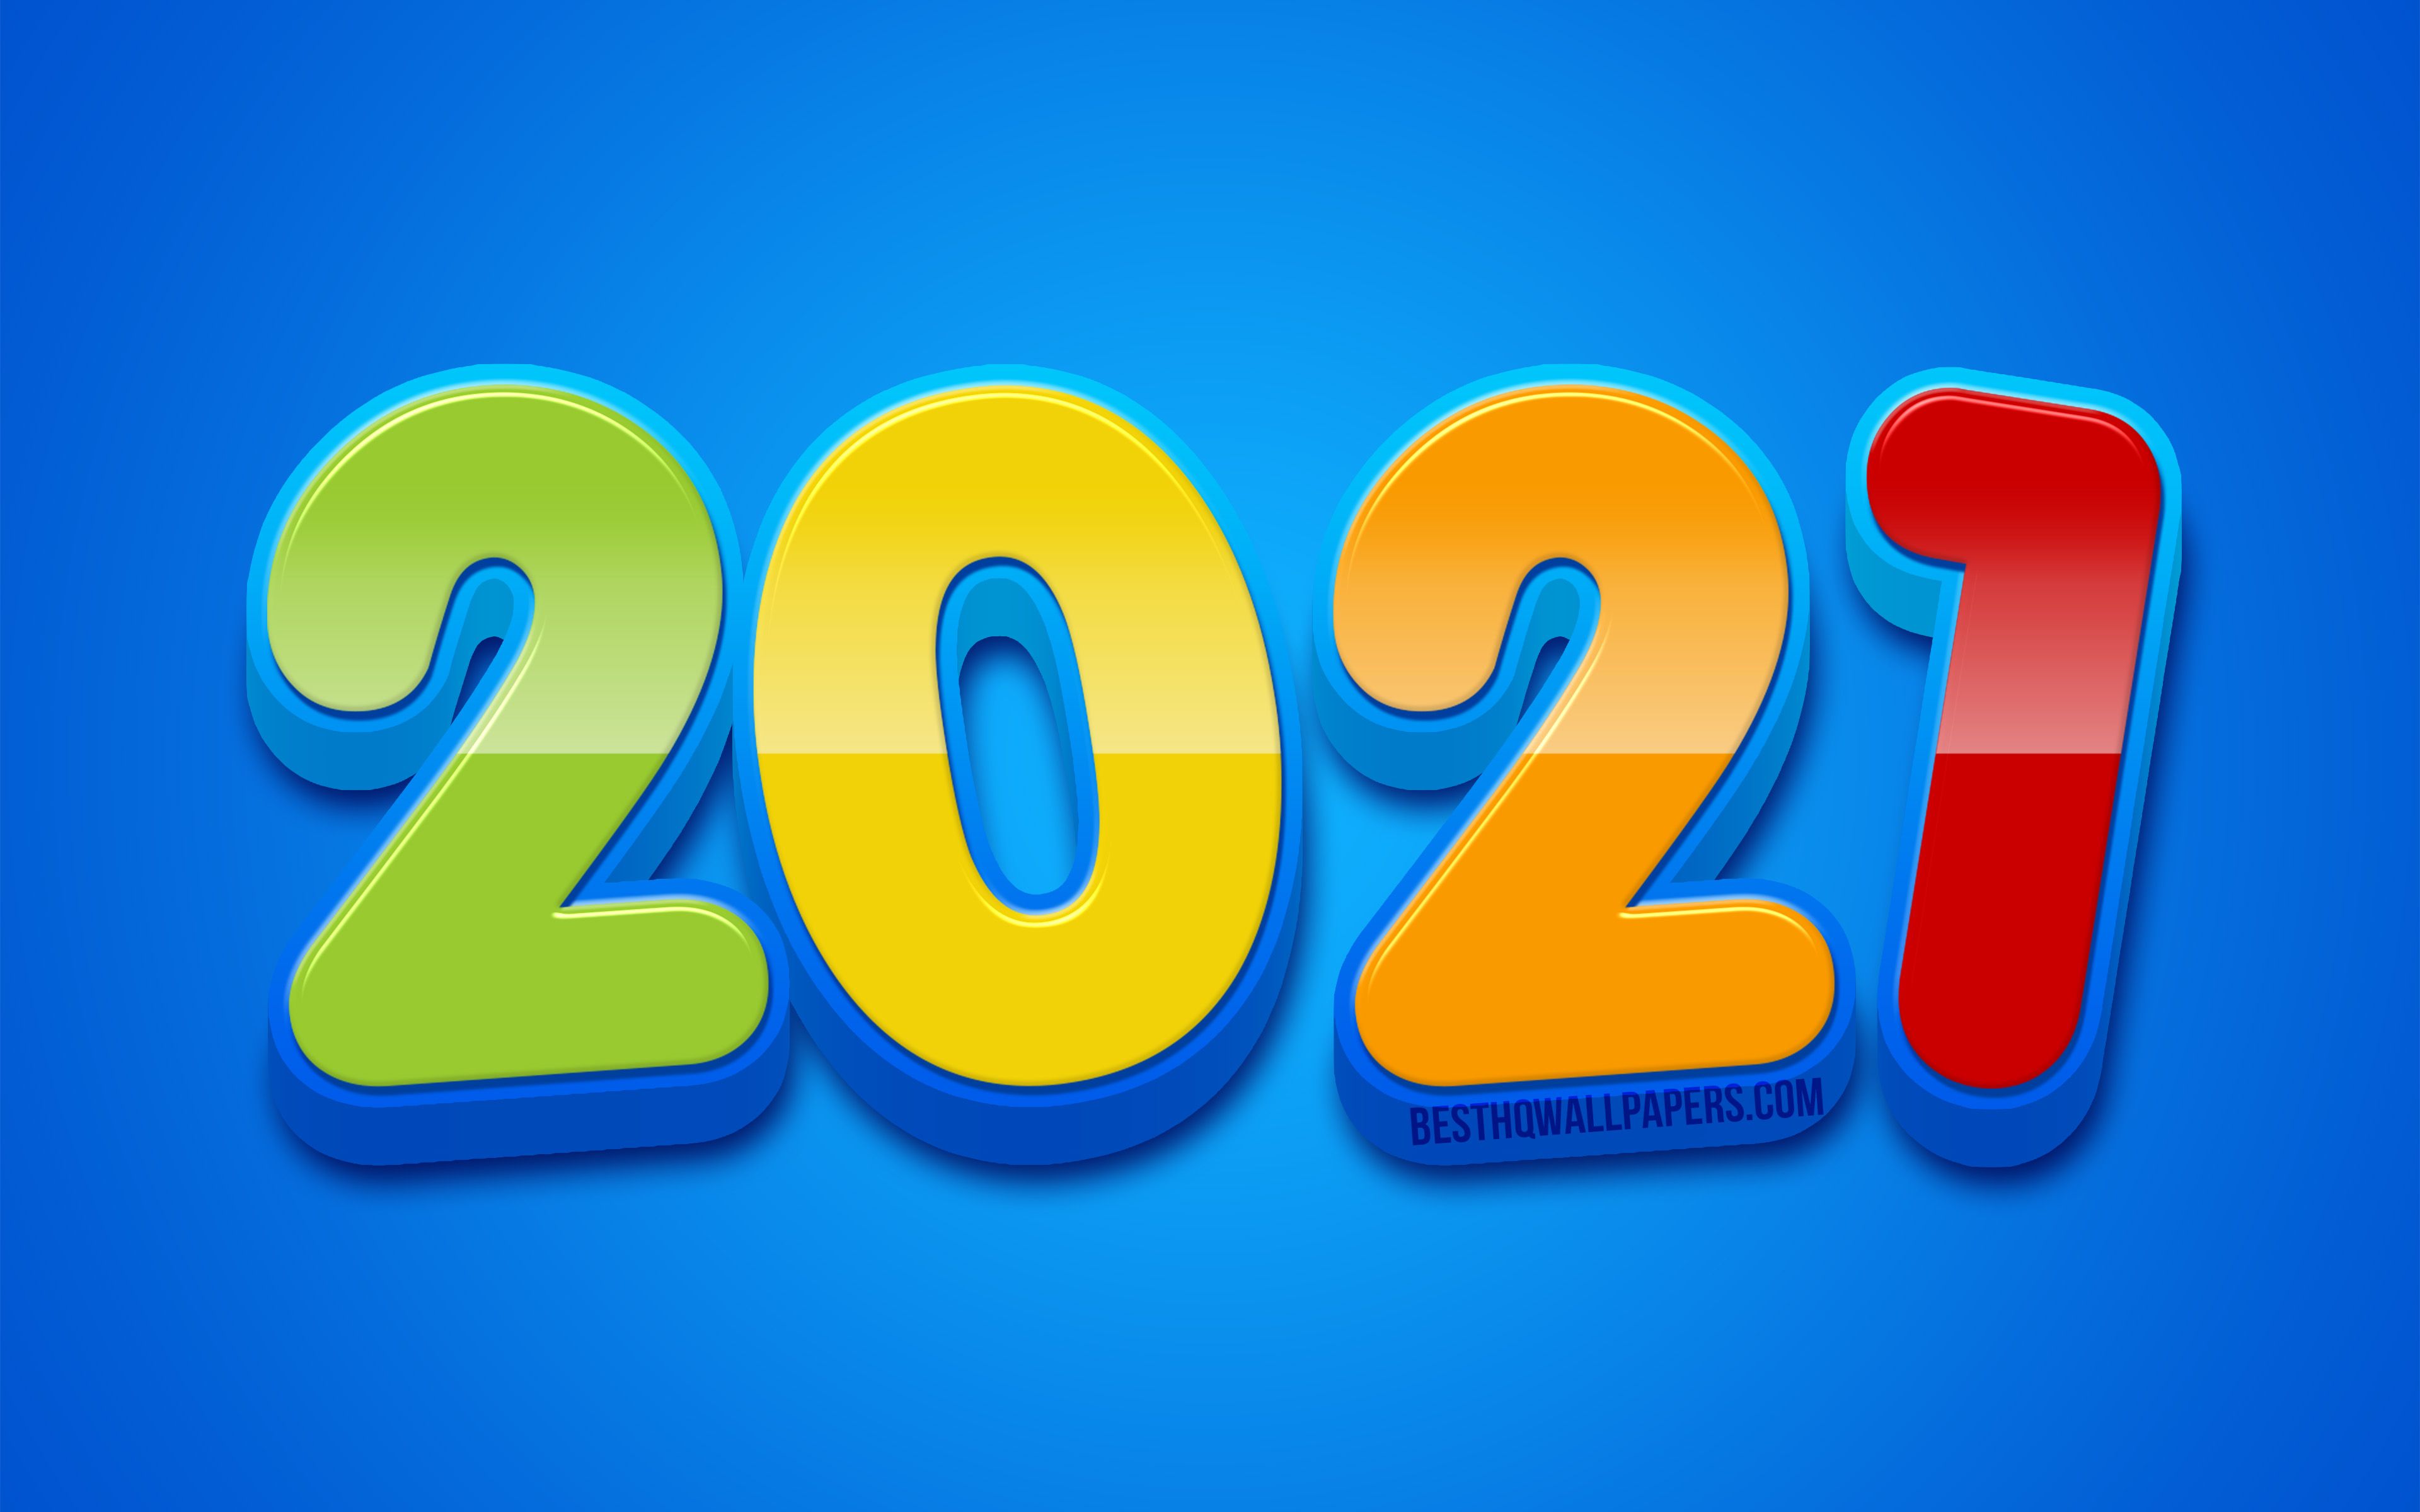 Download wallpaper 4k, Happy New Year colorful 3D digits, 2021 colorful digits, 2021 concepts, 2021 new year, 2021 on blue background, 2021 year digits for desktop with resolution 3840x2400. High Quality HD picture wallpaper